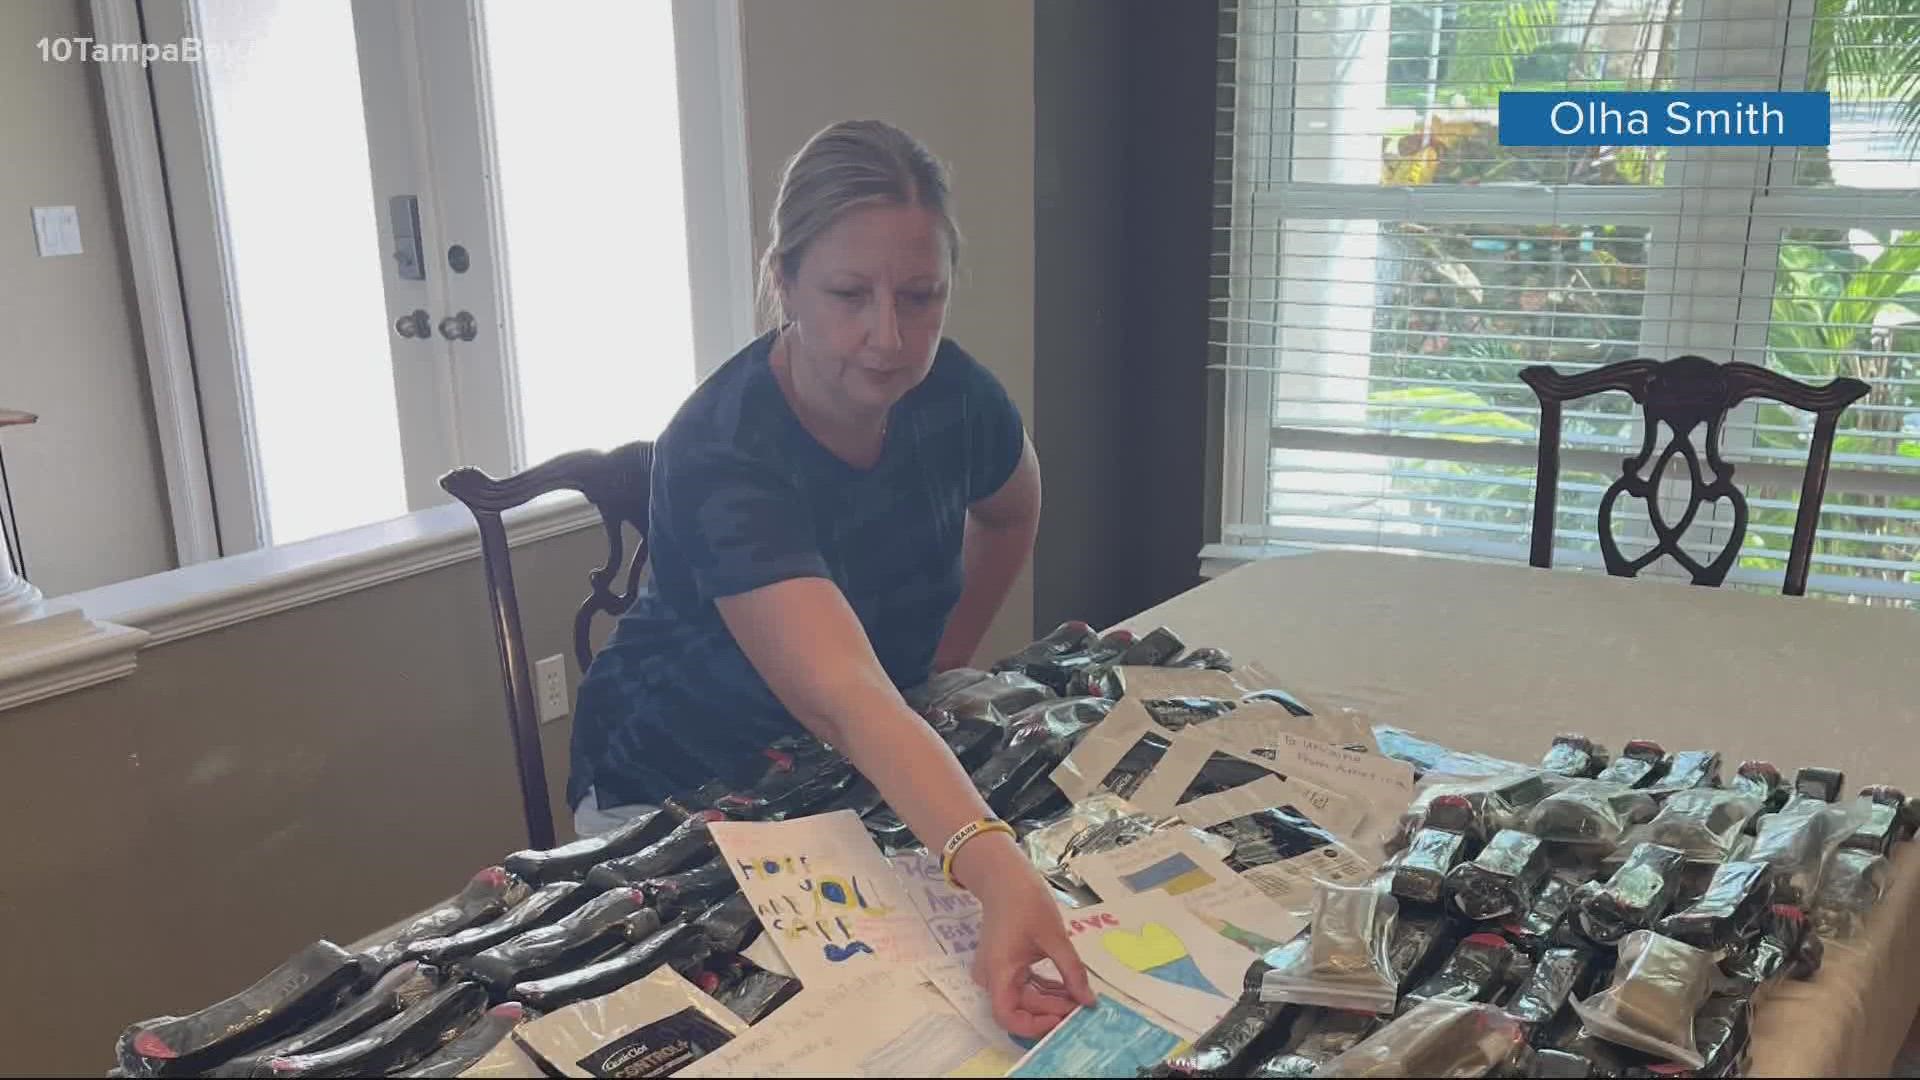 Olha Smith lives in Palm Harbor, but her family still lives in Ukraine. She's spent weeks gathering essential medical supplies for doctors in her home country.